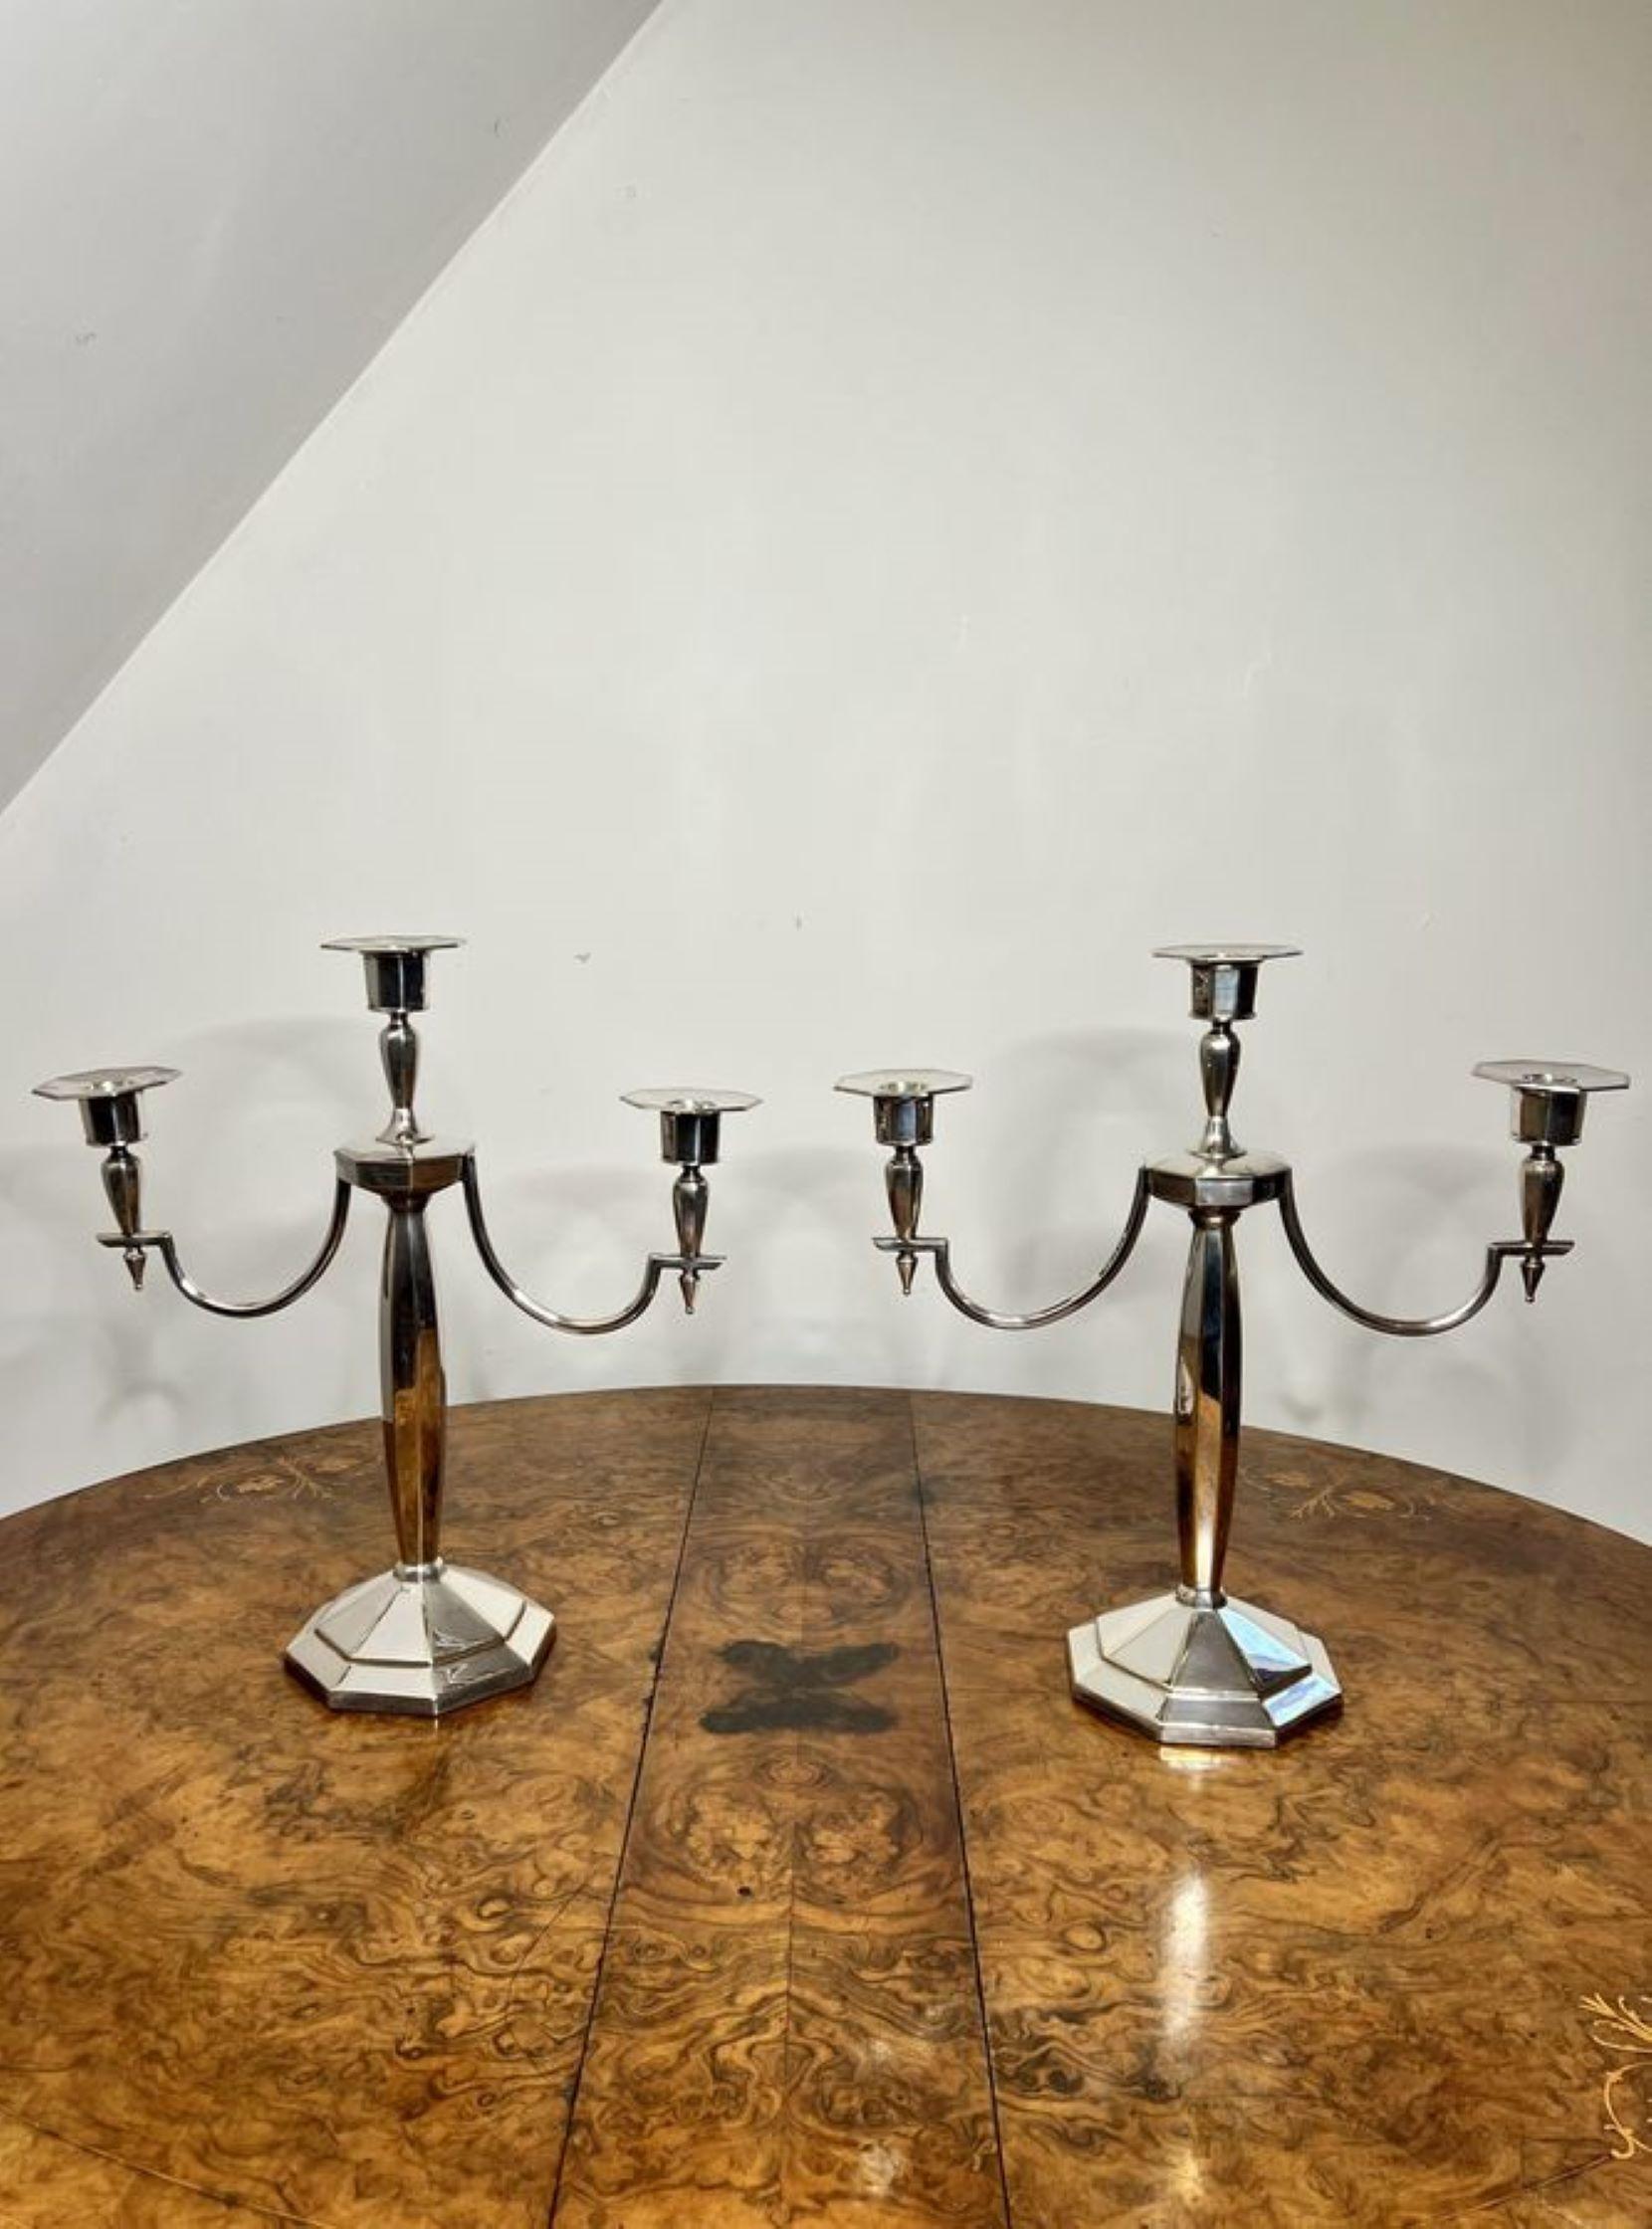 Outstanding quality pair of antique Edwardian silver plated candelabras, having a quality pair of antique Edwardian silver plated candelabras, with three light branches above a shaped column standing on a shaped base.

D. 1900